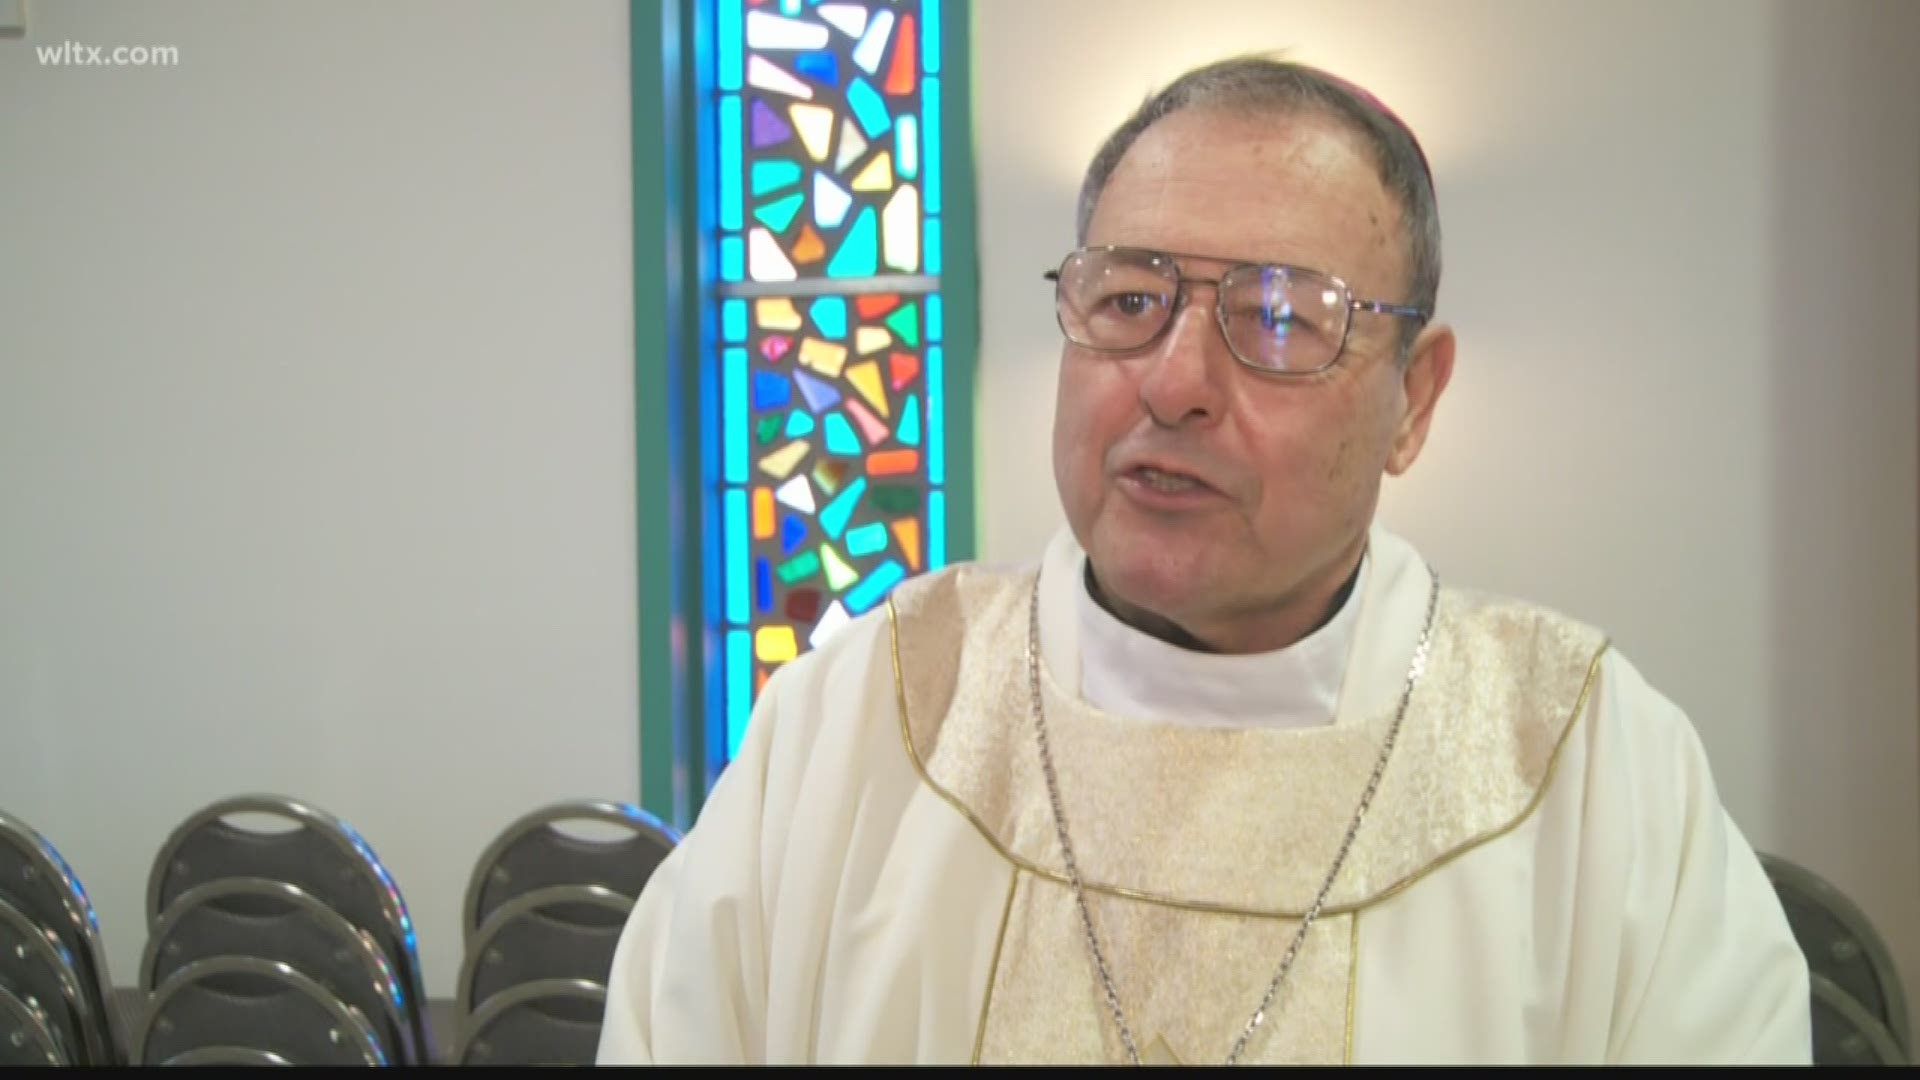 A lawsuit is accusing Bishop Robert Guglielmone, the leader of the Catholic Church in South Carolina  of sexual abusing a minor decades ago. The Catholic Diocese in Charleston acknowledged Wednesday afternoon that the suit had been filed in Nassau County, New York.